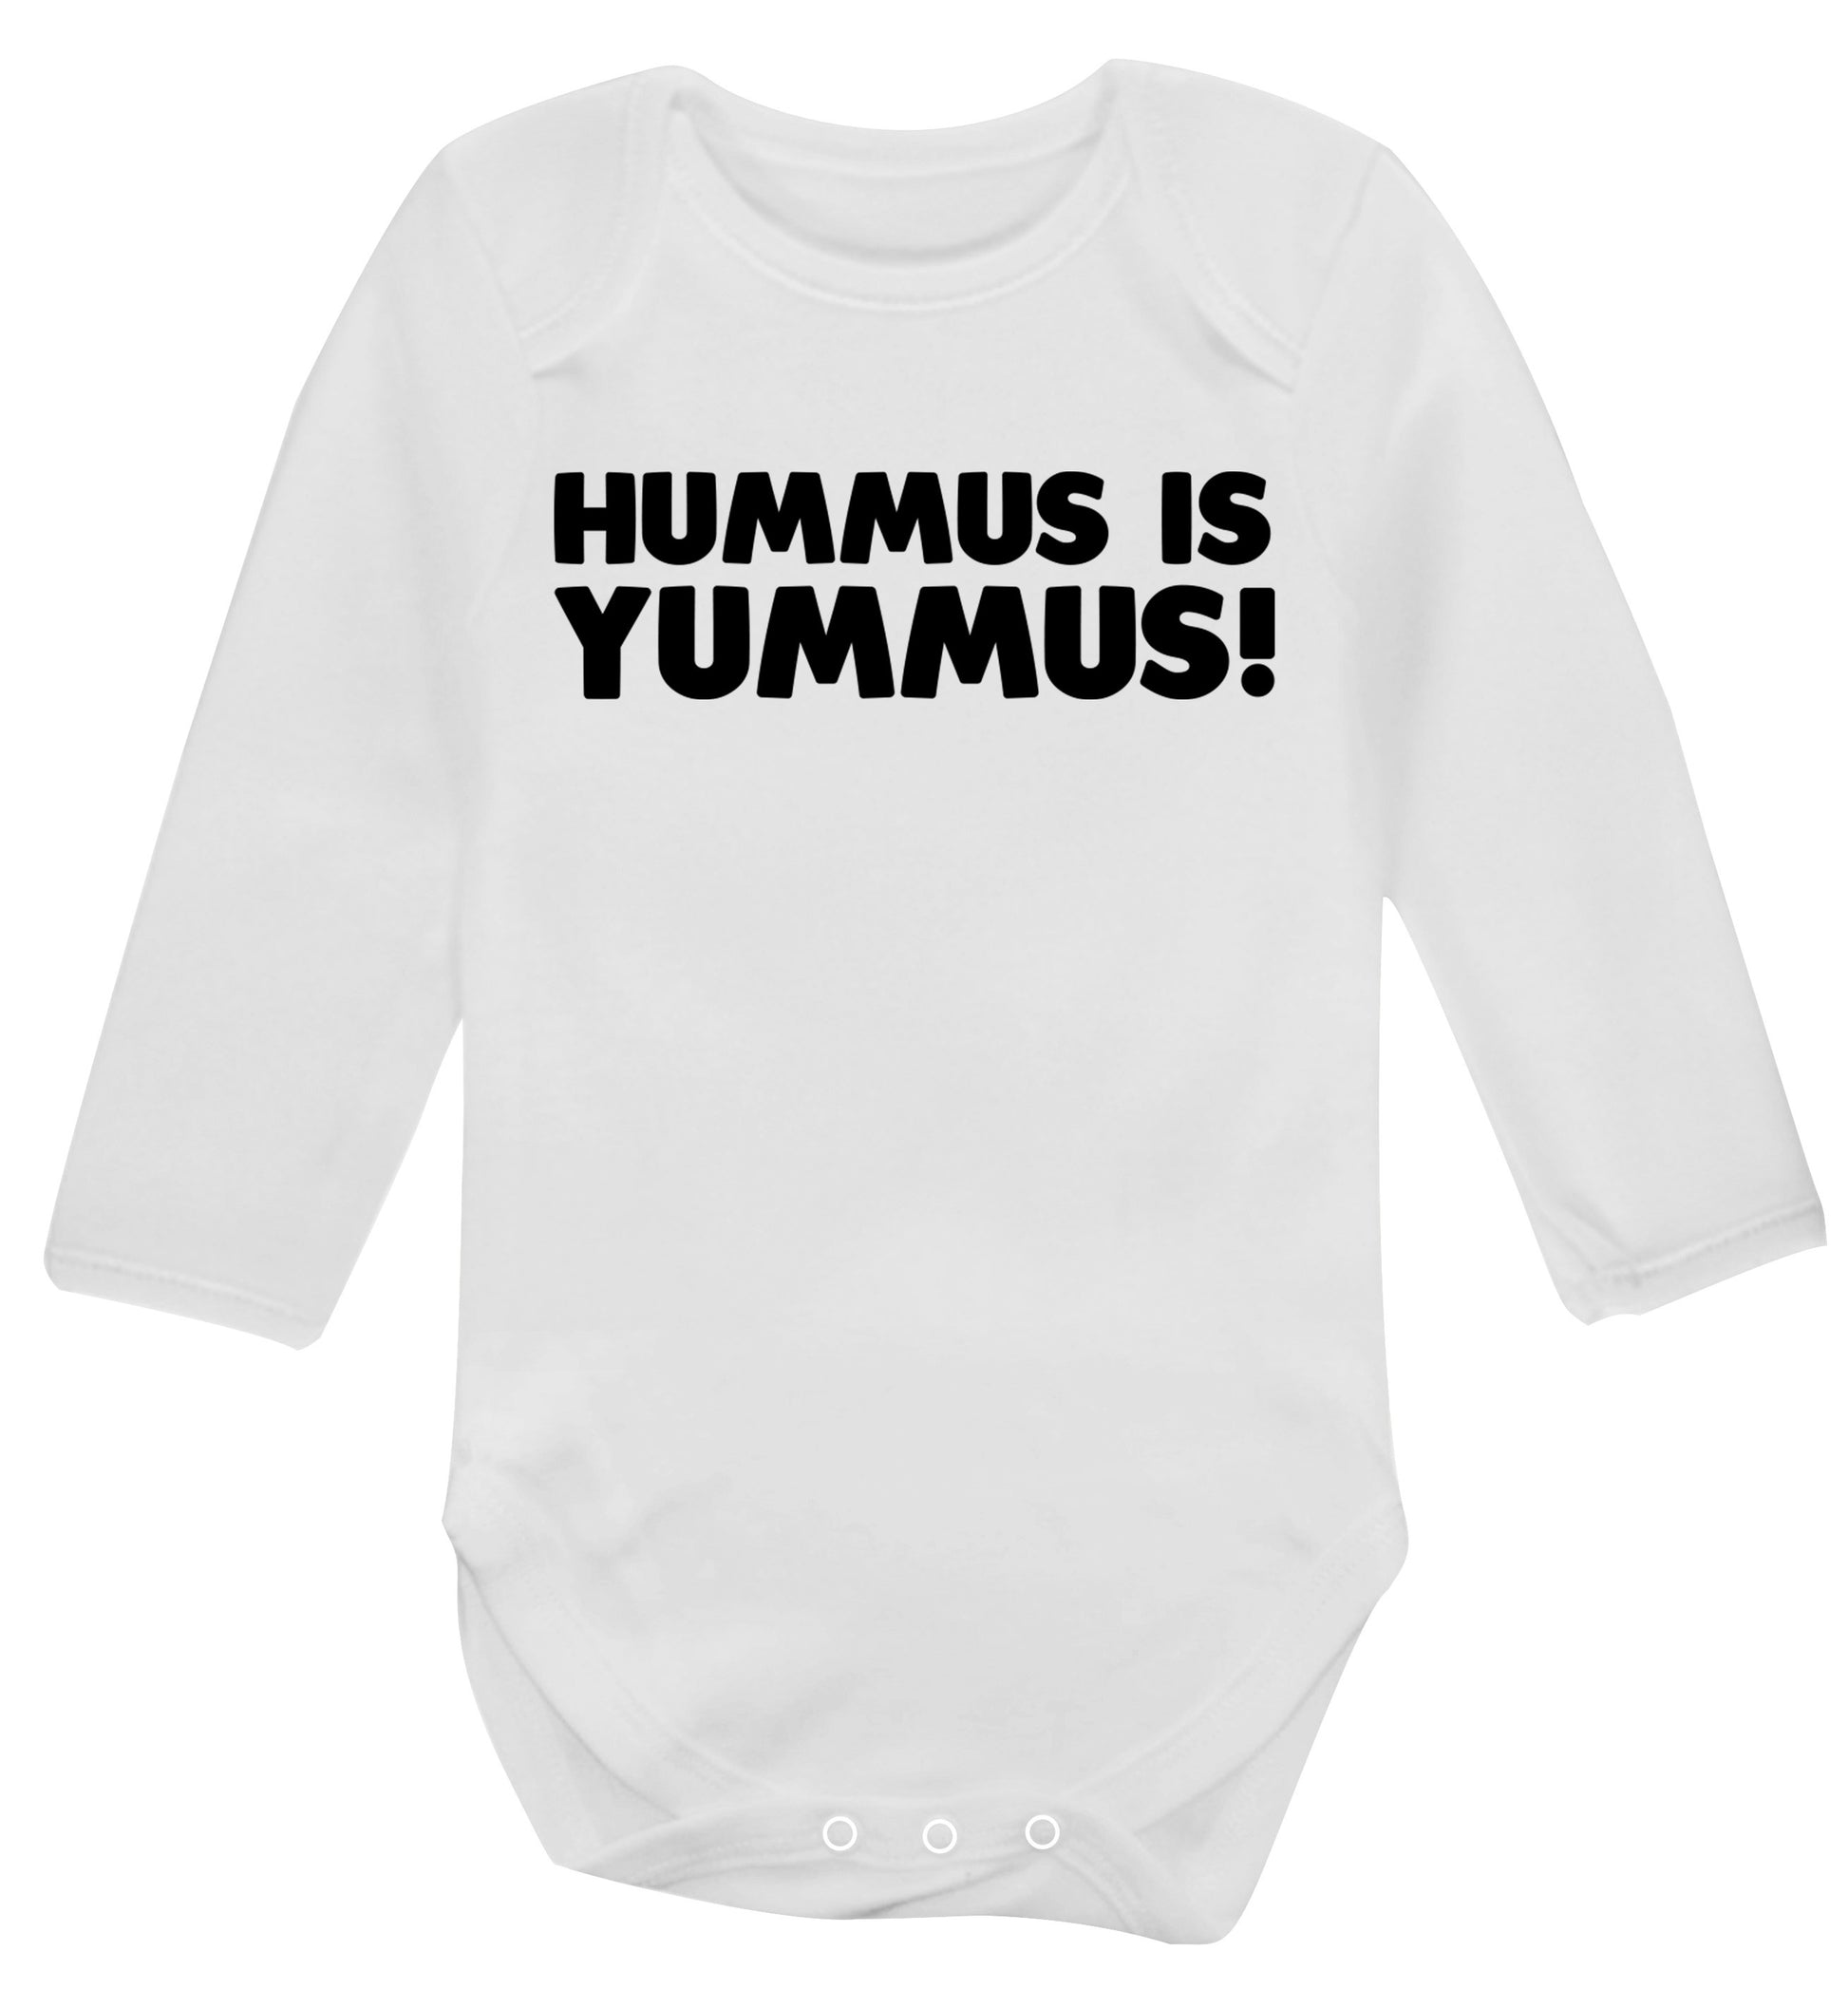 Hummus is Yummus  Baby Vest long sleeved white 6-12 months